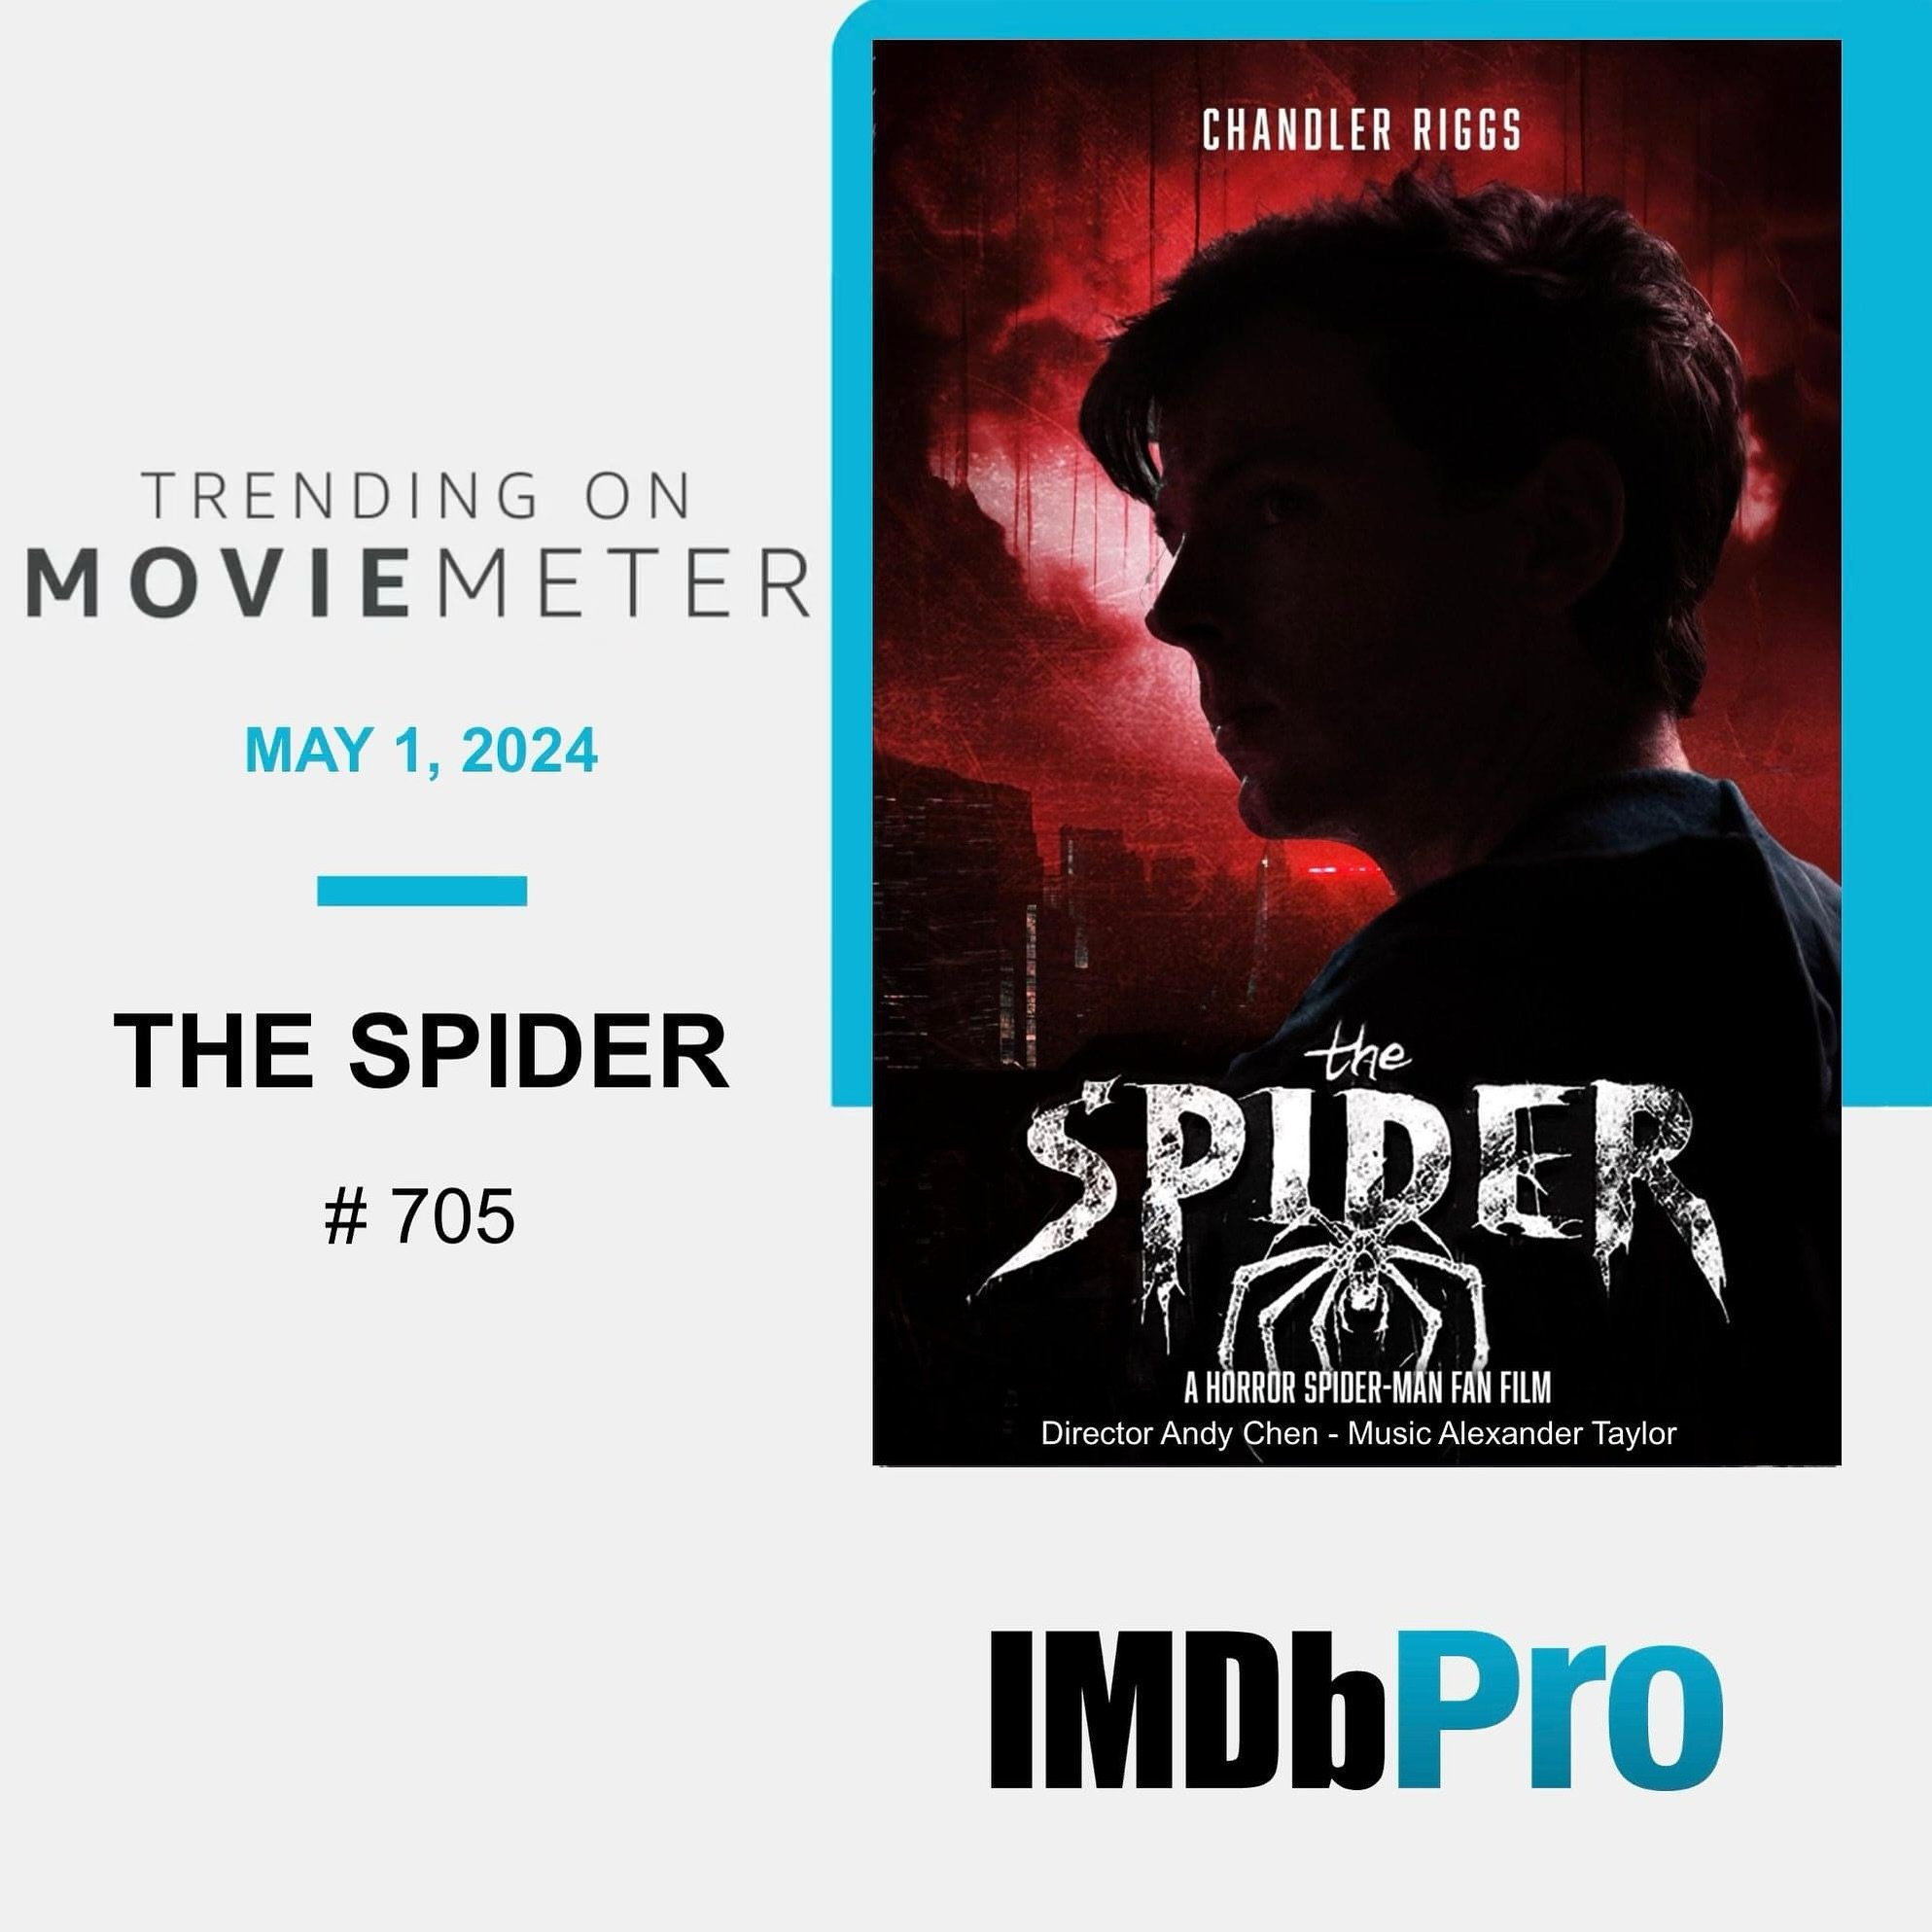 On IMDbPro, THE SPIDER has MovieMeter number of 705, which is unprecedented for a short! This impressive film was directed by @locustgarden and scored by our multi-instrumentalist &amp; award-winning client, @alexandertaylormusic. Congrats to all inv